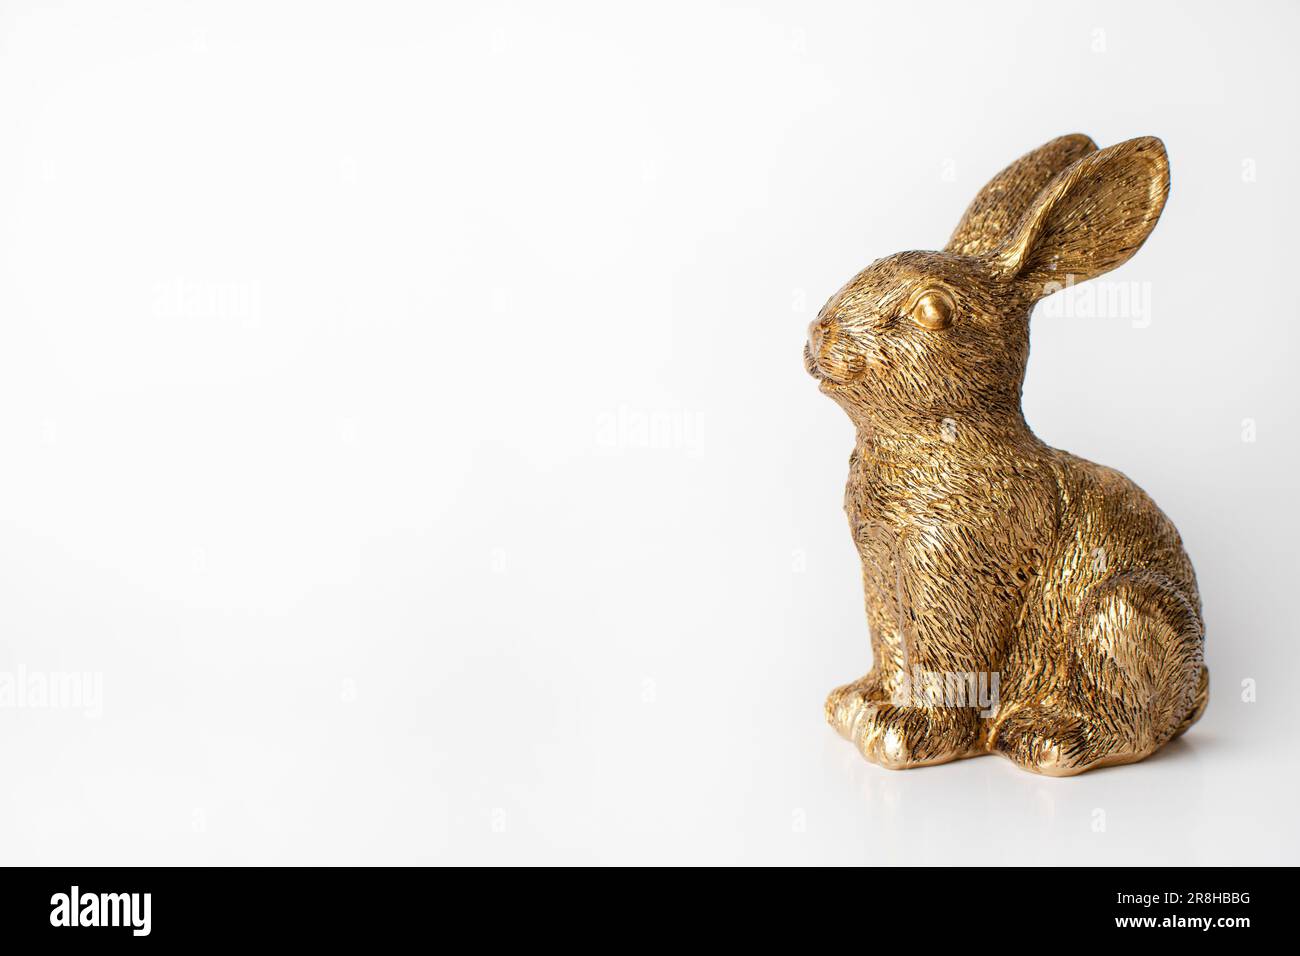 Golden rabbit figurine on the white background. Free space Stock Photo